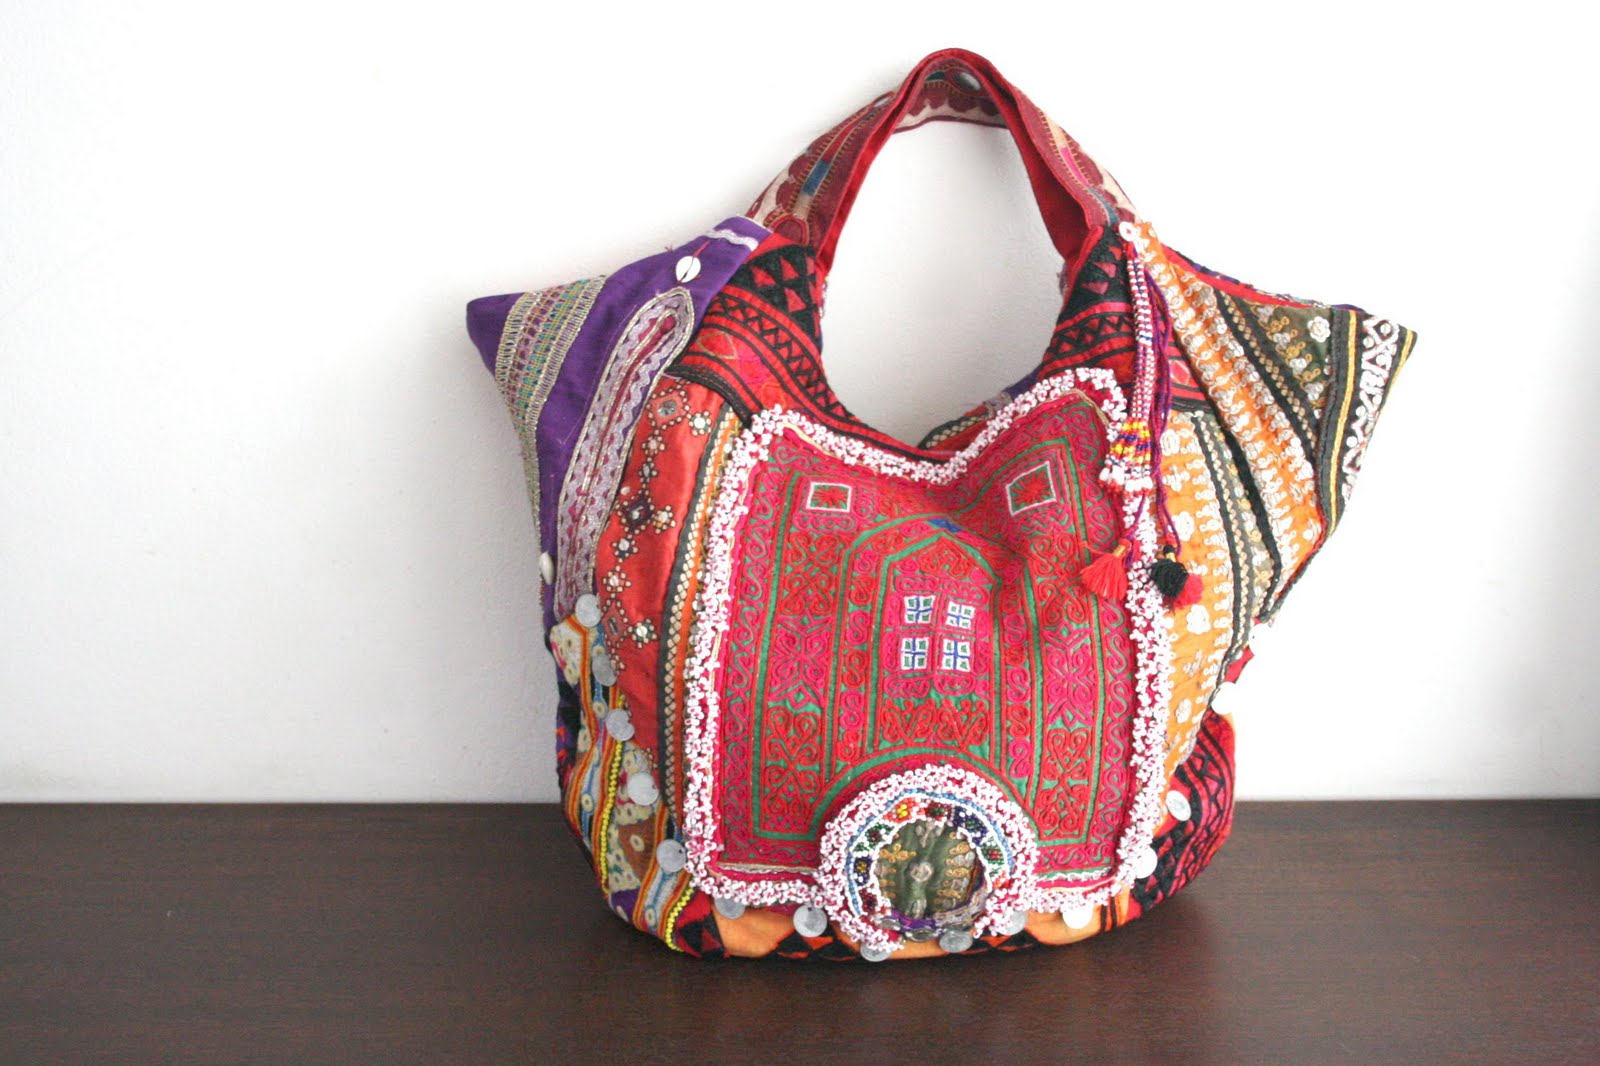 Dazzling Lanna Ethnic bags shop: New patchwork bags from Indian / Afghan fabric